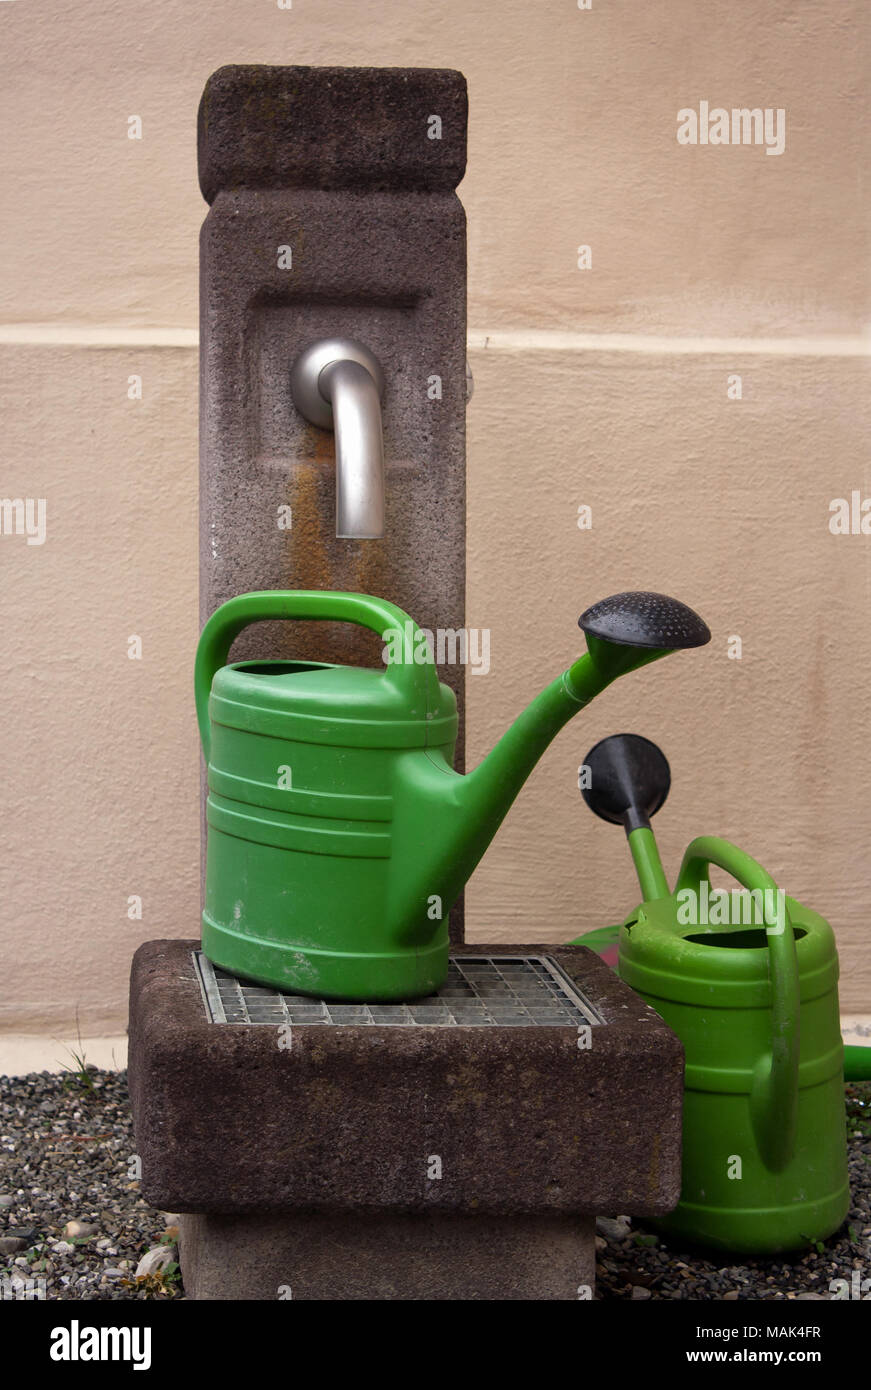 Two green watering cans at an outdoor water faucet Stock Photo